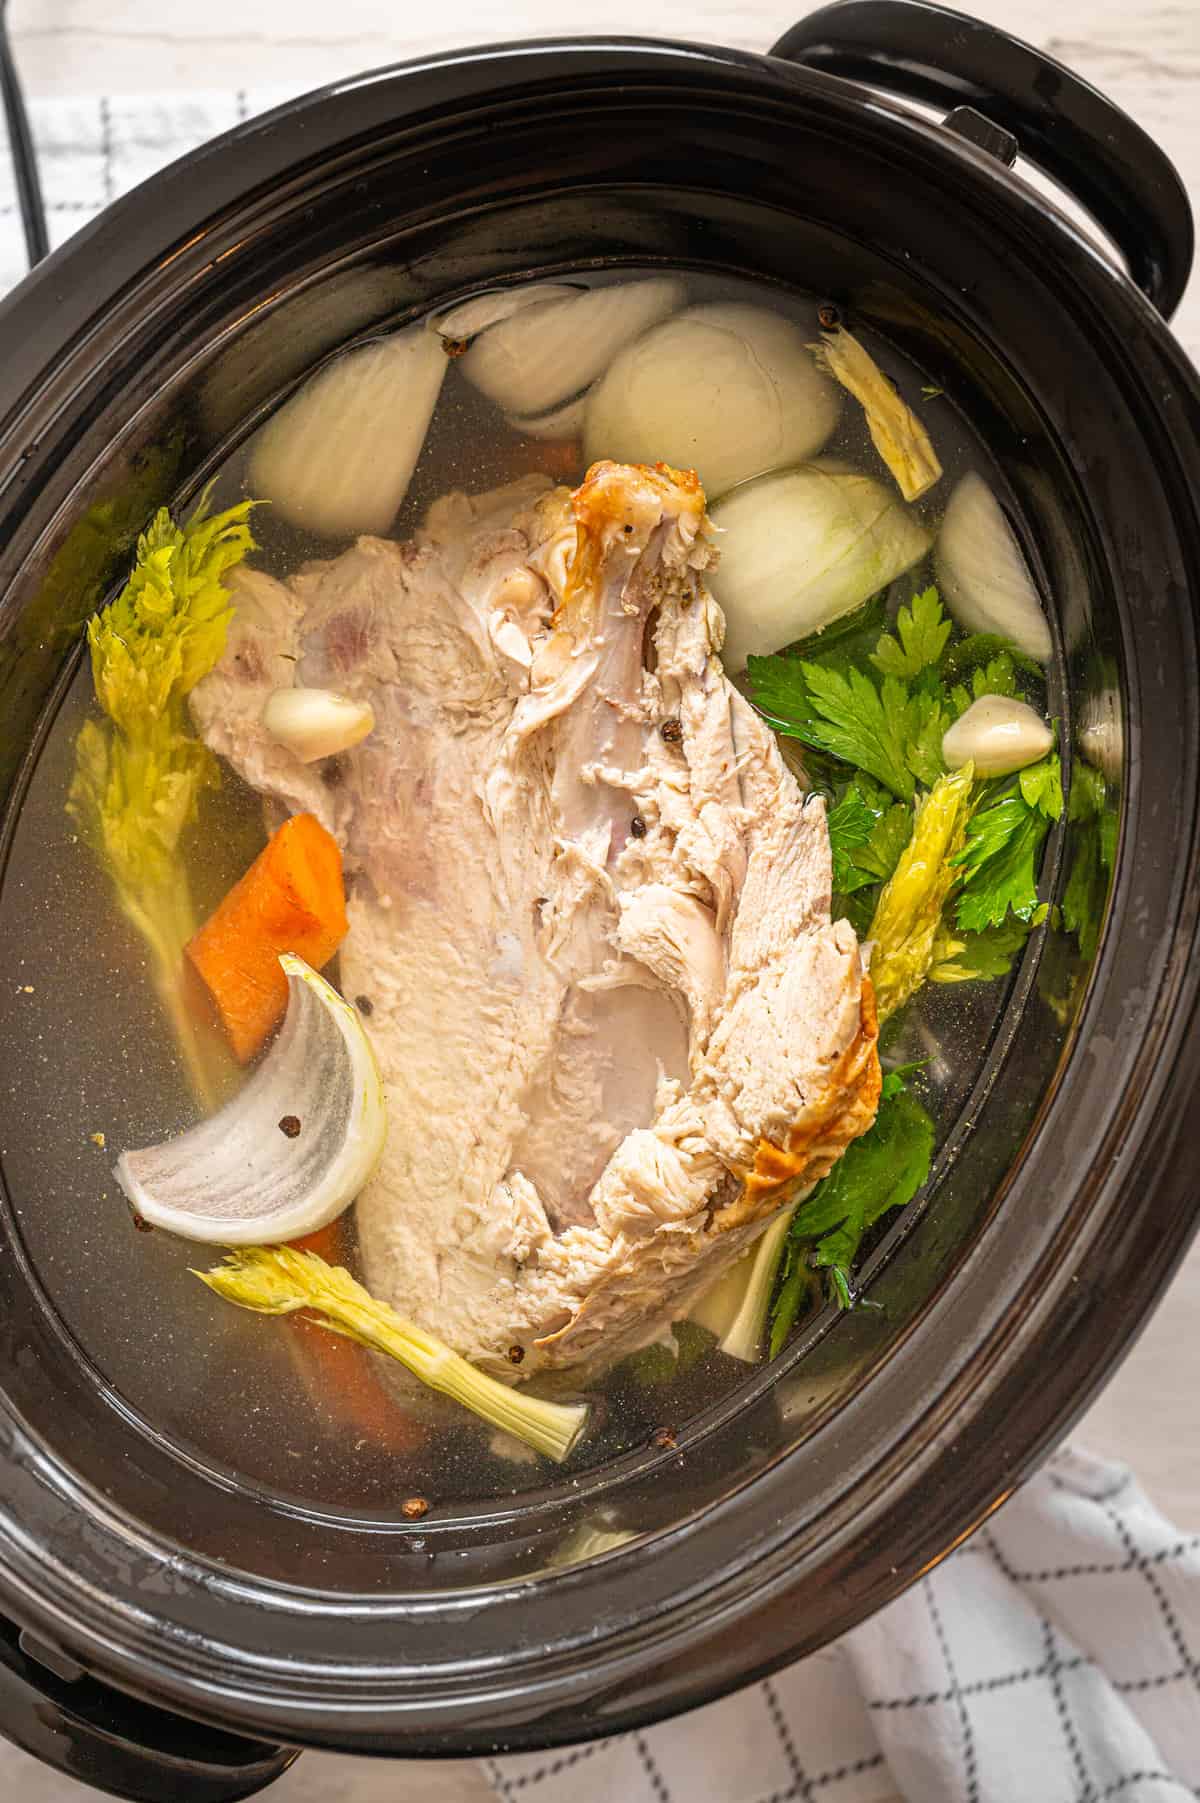 Slow cooker with turkey breast carcass, onions, carrots, celery, garlic cloves, peppercorns, and water to make turkey broth.